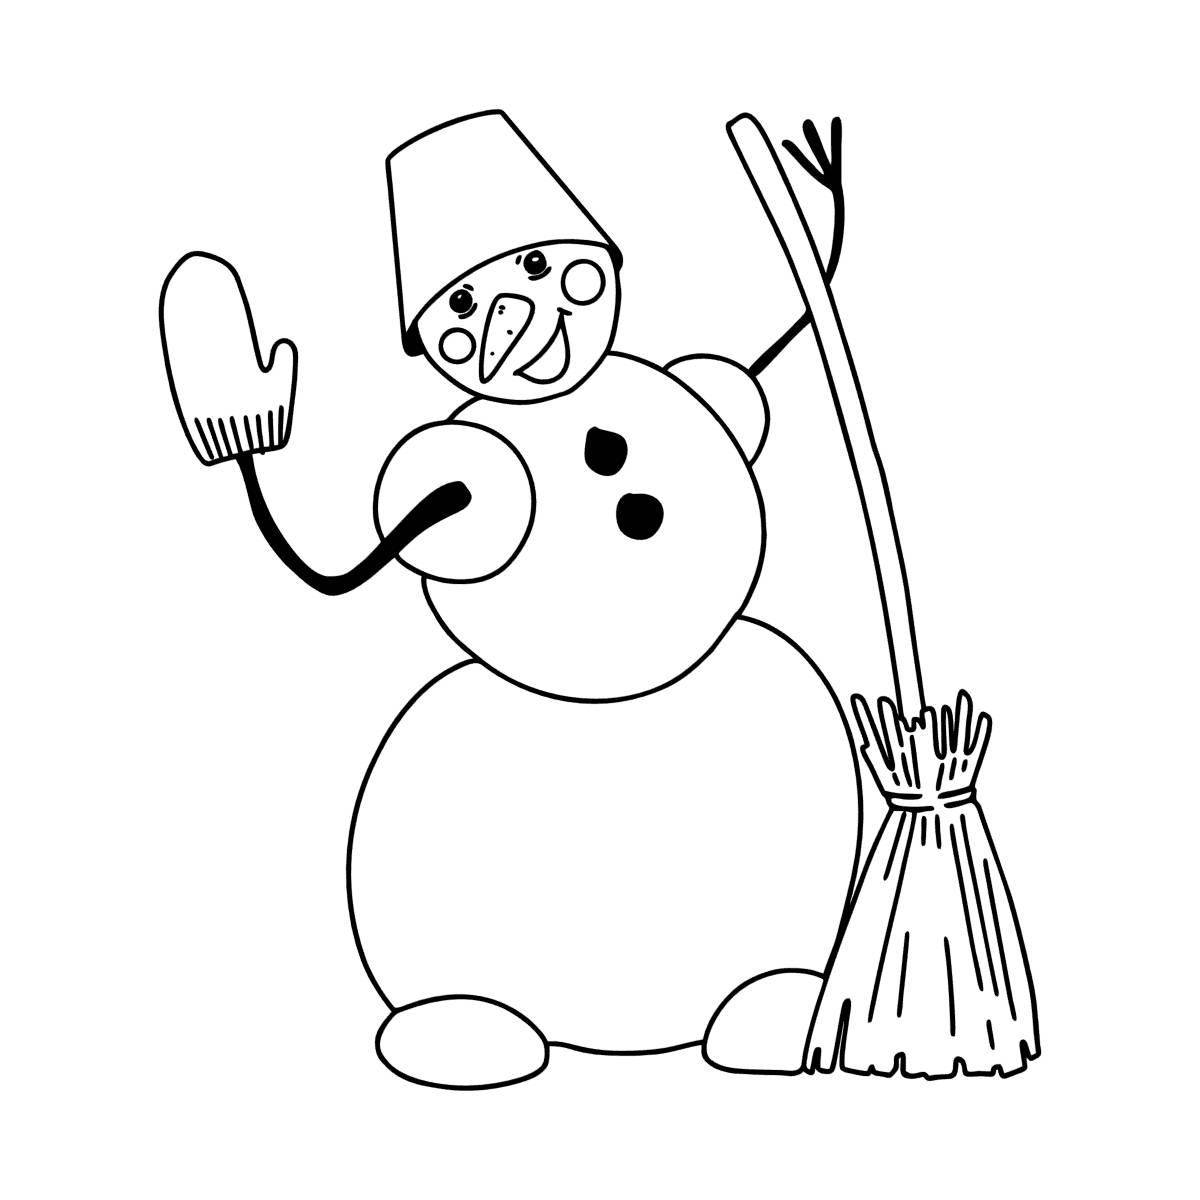 Exotic snowman coloring book